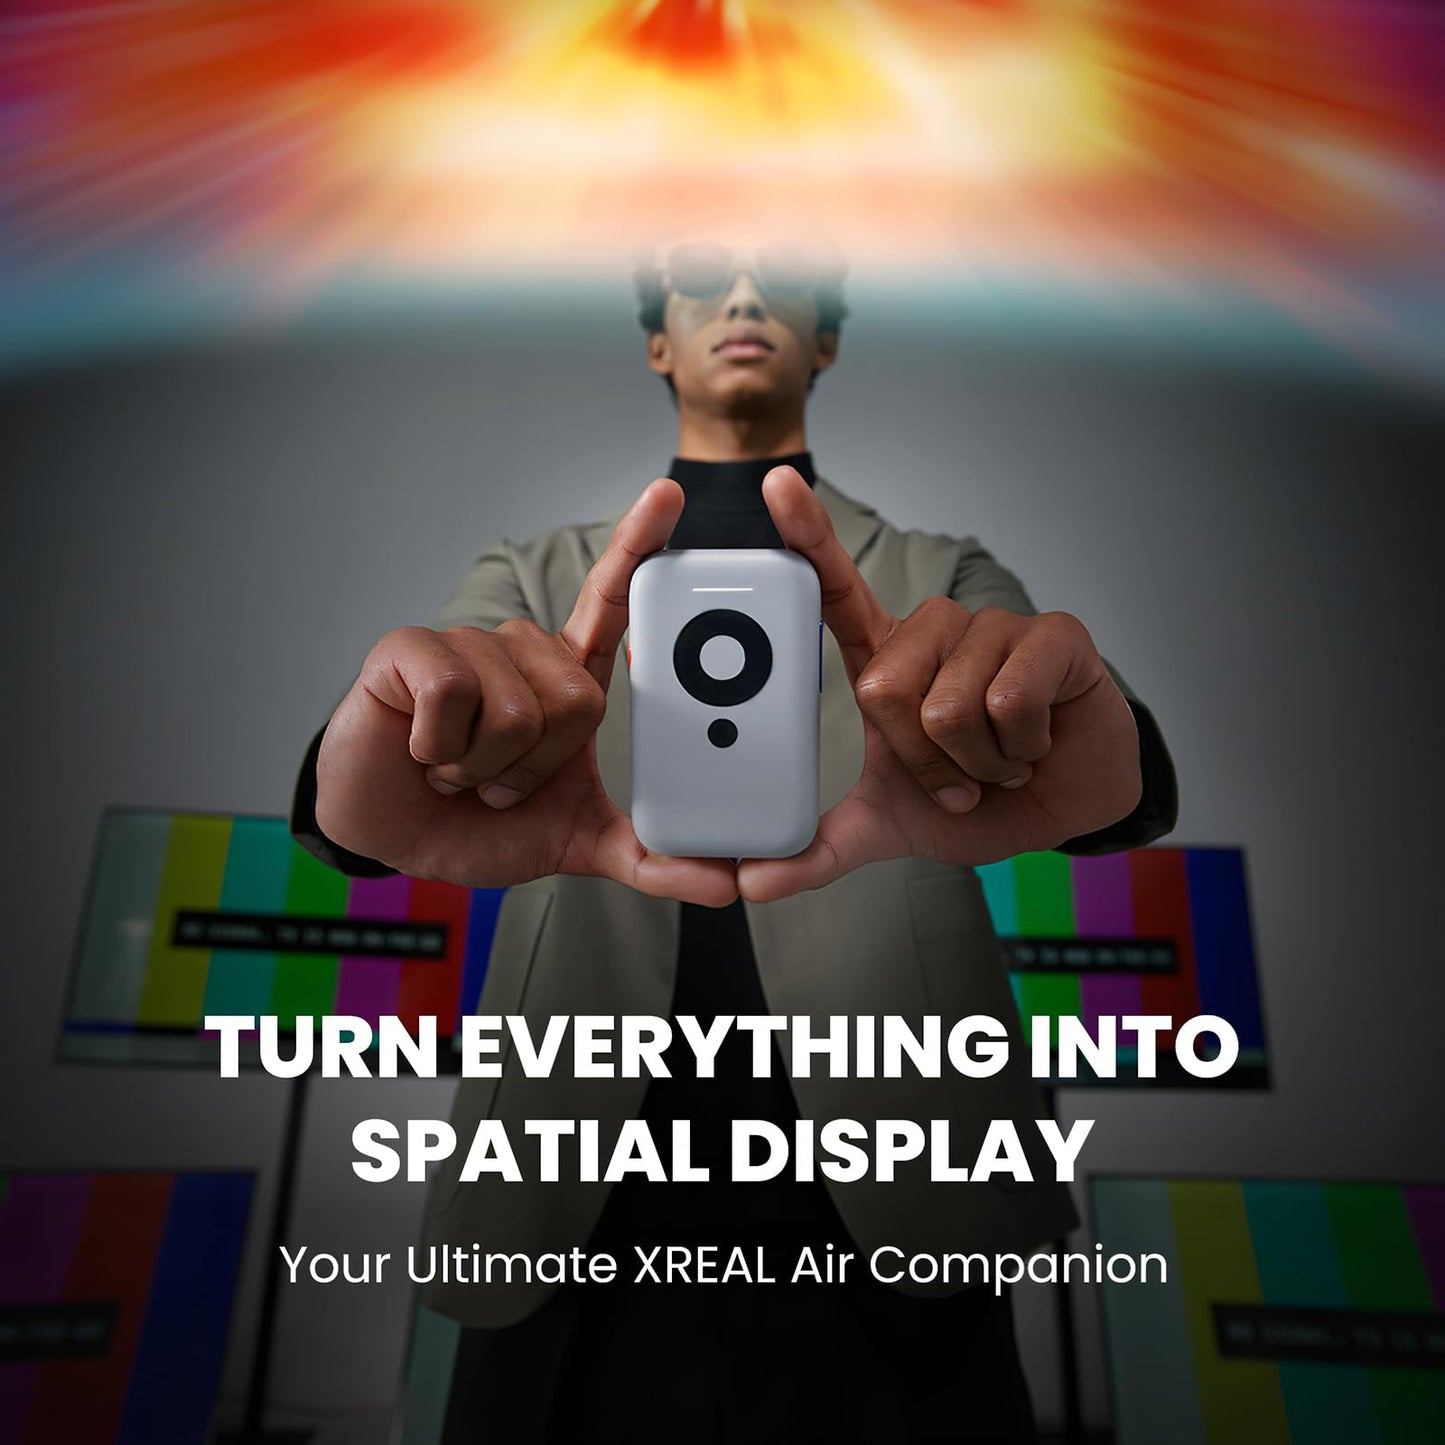 XREAL Beam, Spatial Display Adapter/Dock, Portable TV Box for XREAL AR Glasses, Compatible with Playstation 5/Xbox X/Switch/iPhone 15/SteamDeck/Mac/PC/Android/iOS/Video Glasses - ARVRedtech.com | AR & VR Education Technology